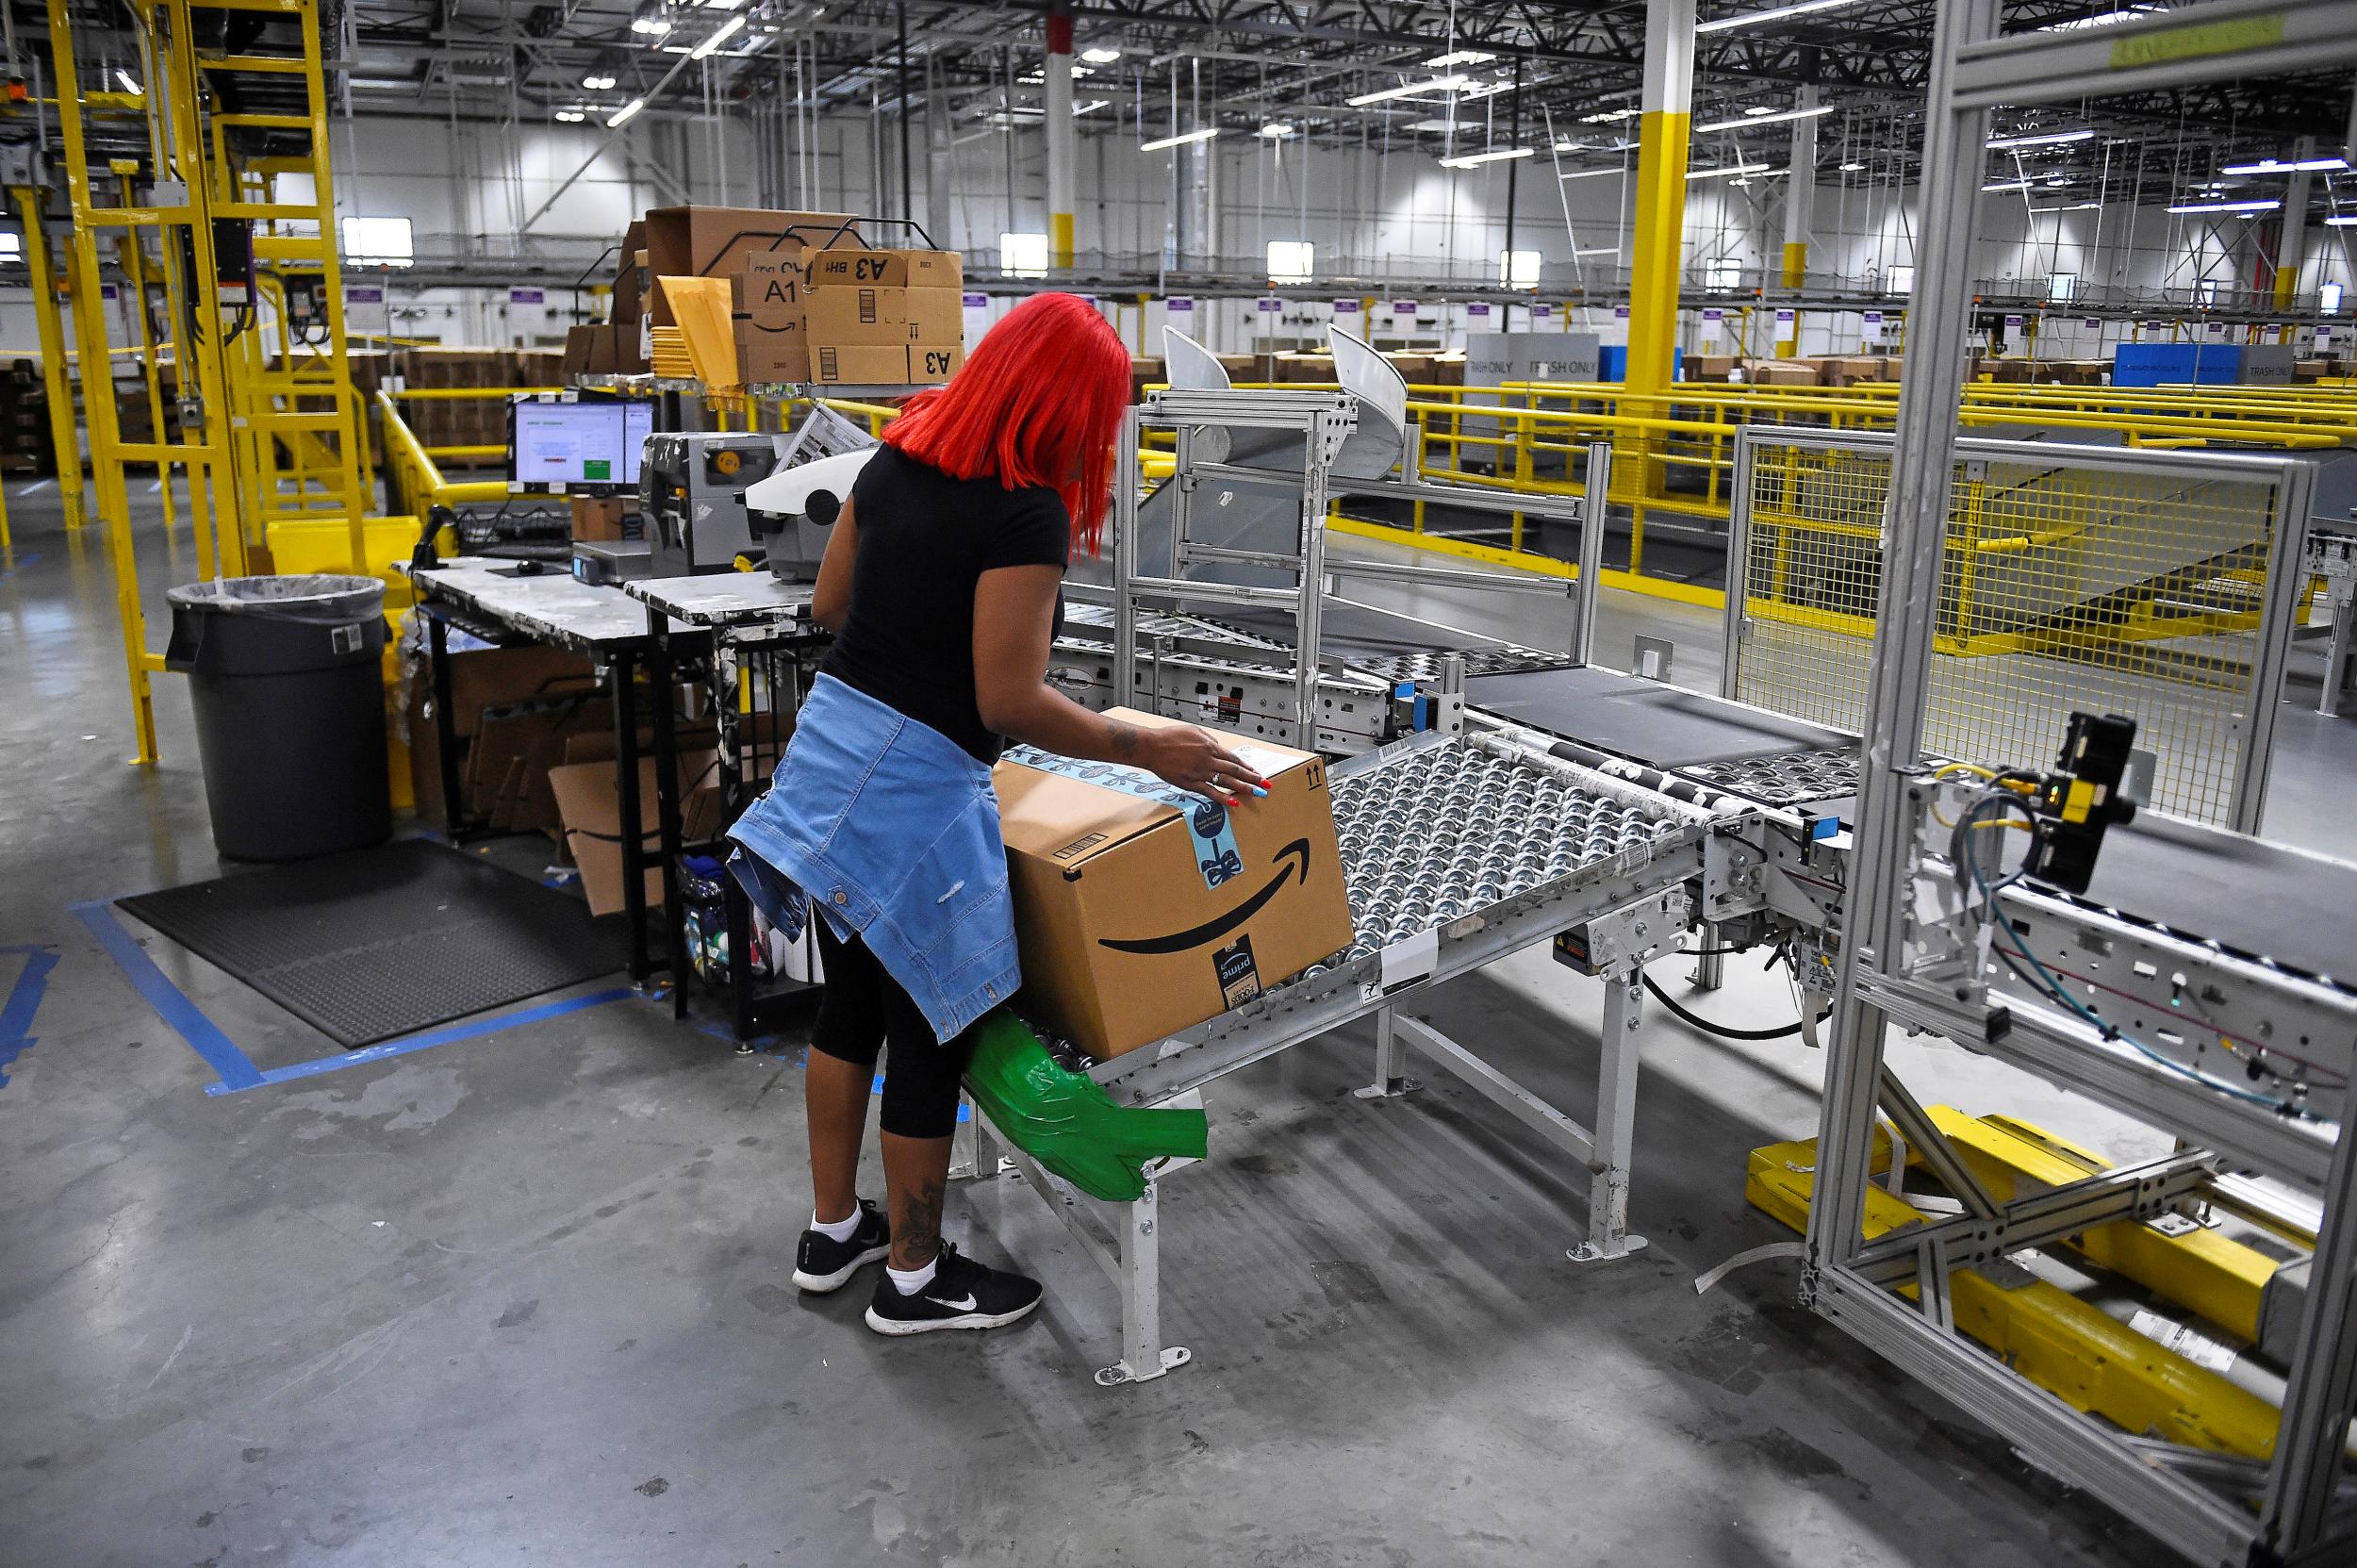 Amazon employees in Maryland say they were fired for organizing workers